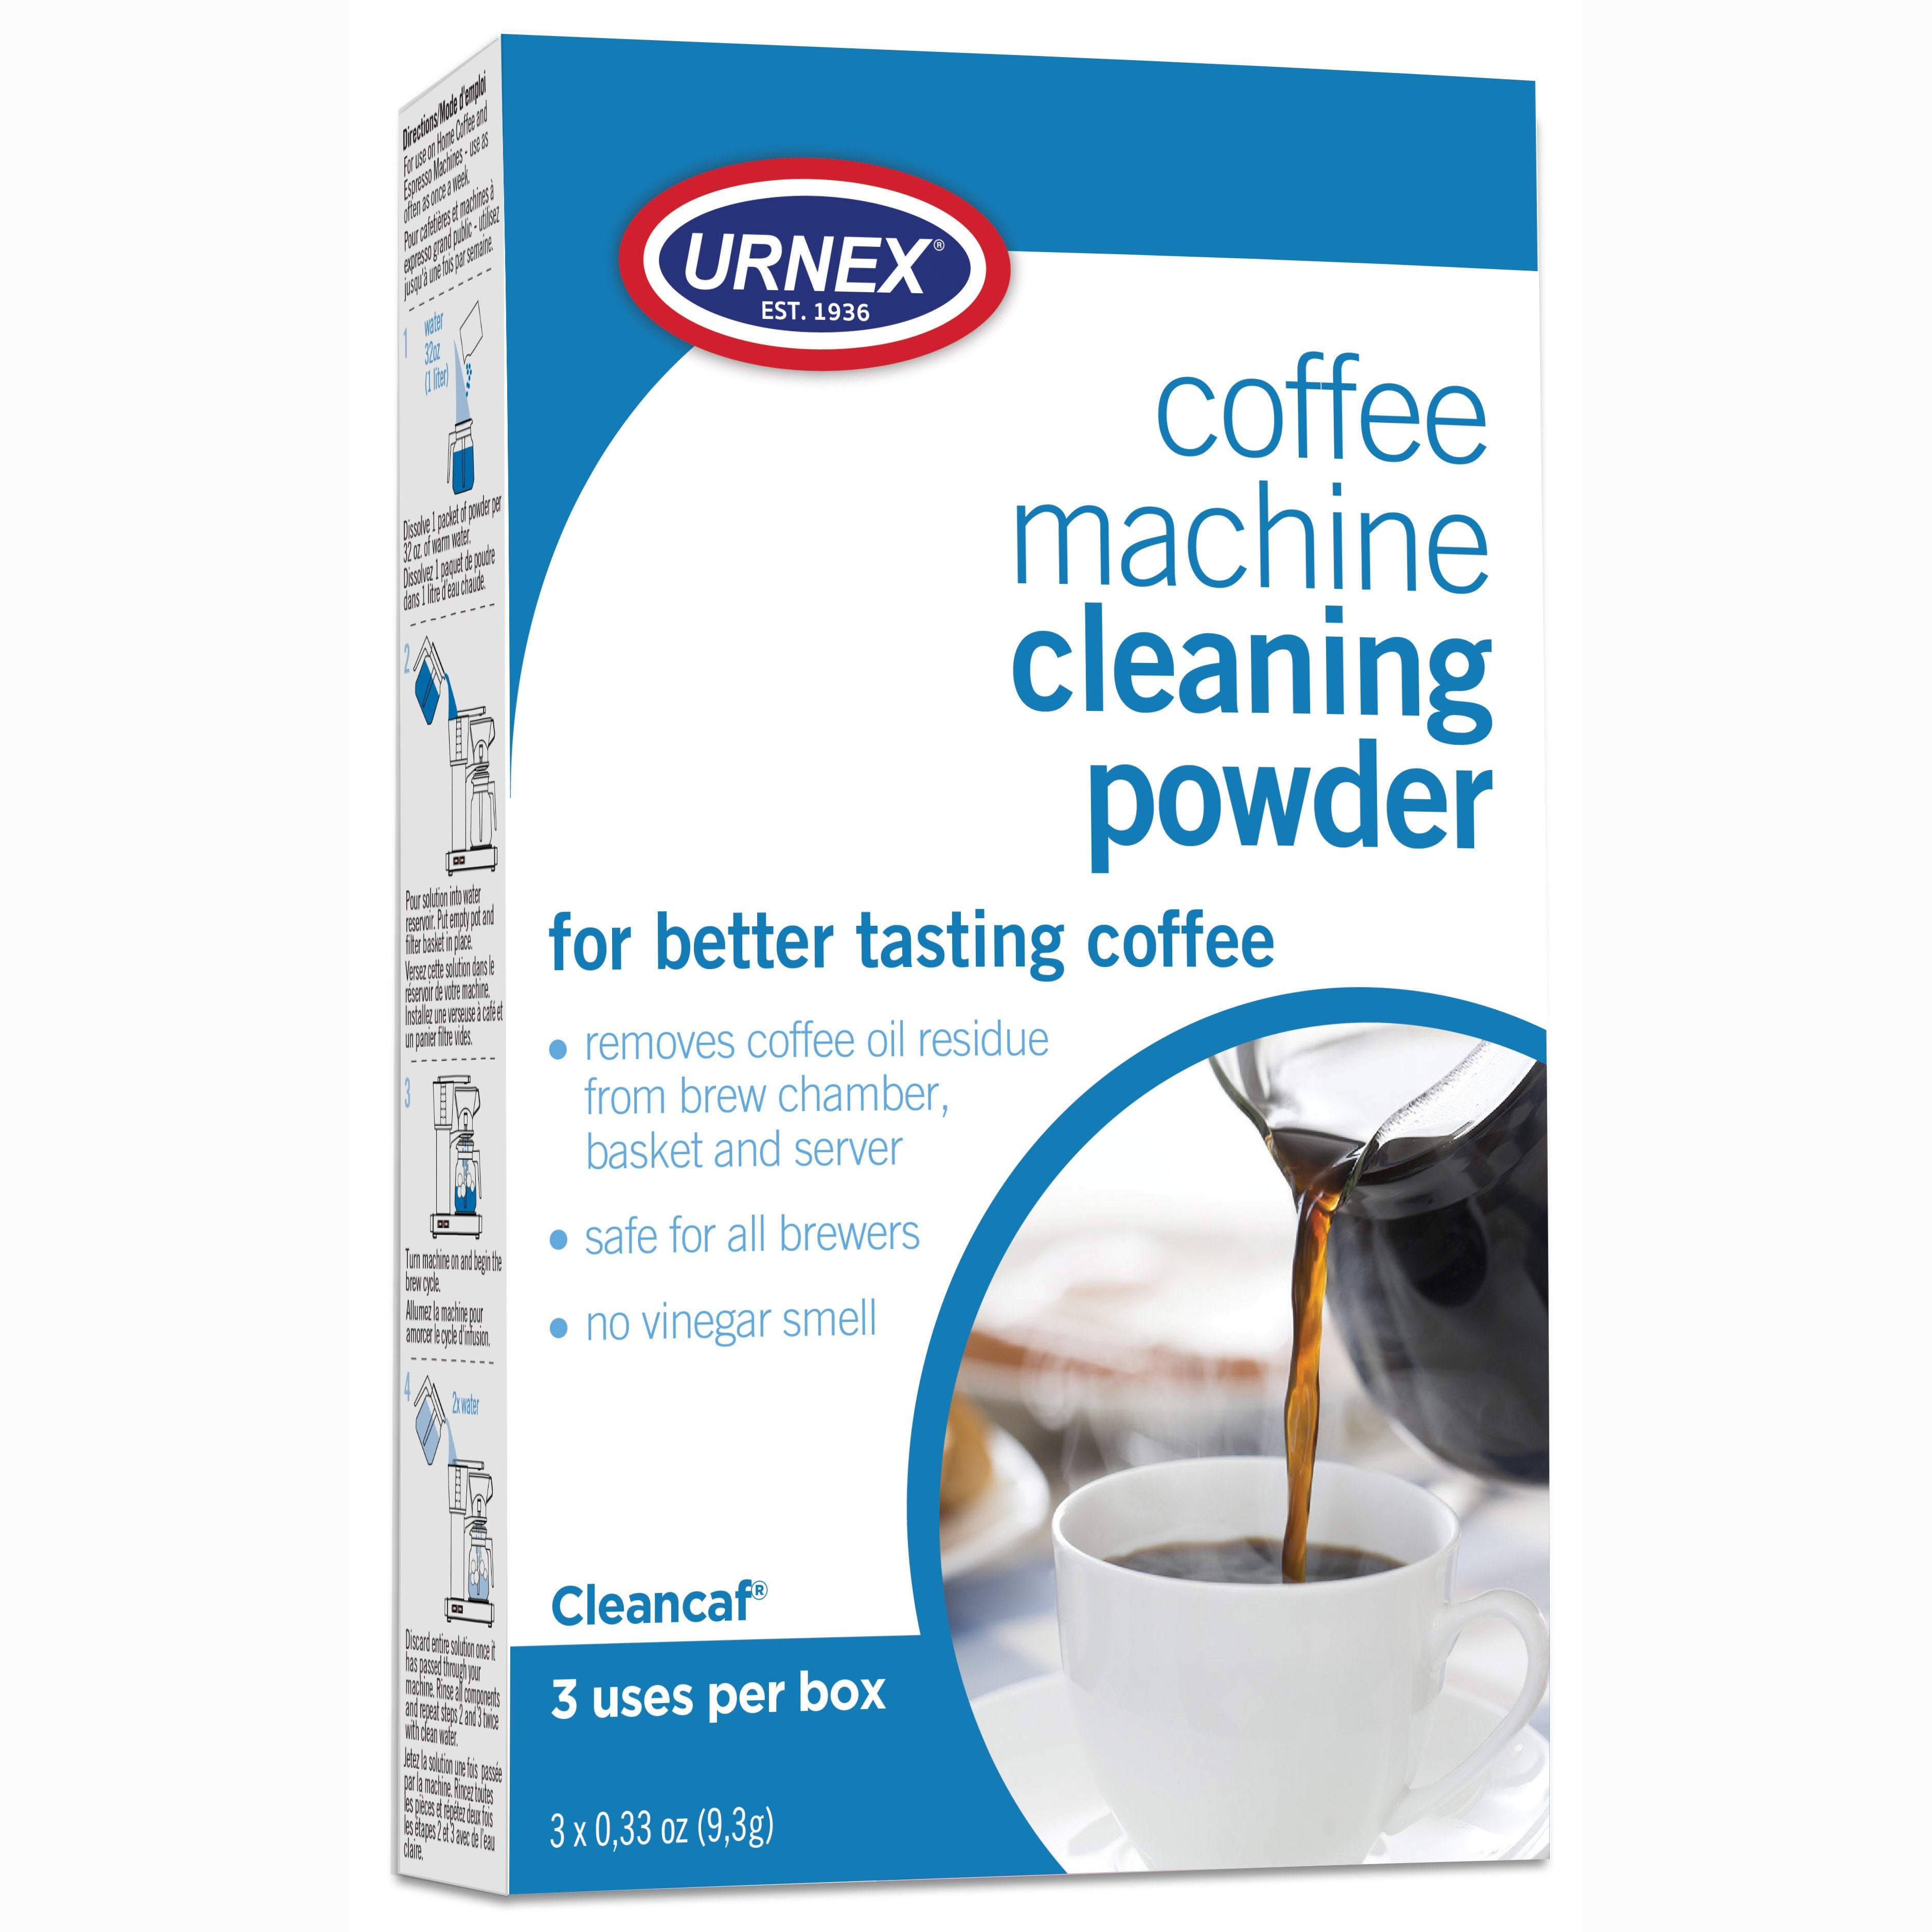 Biocaf Grinder Cleaning Tablets - How to Clean a Coffee Grinder